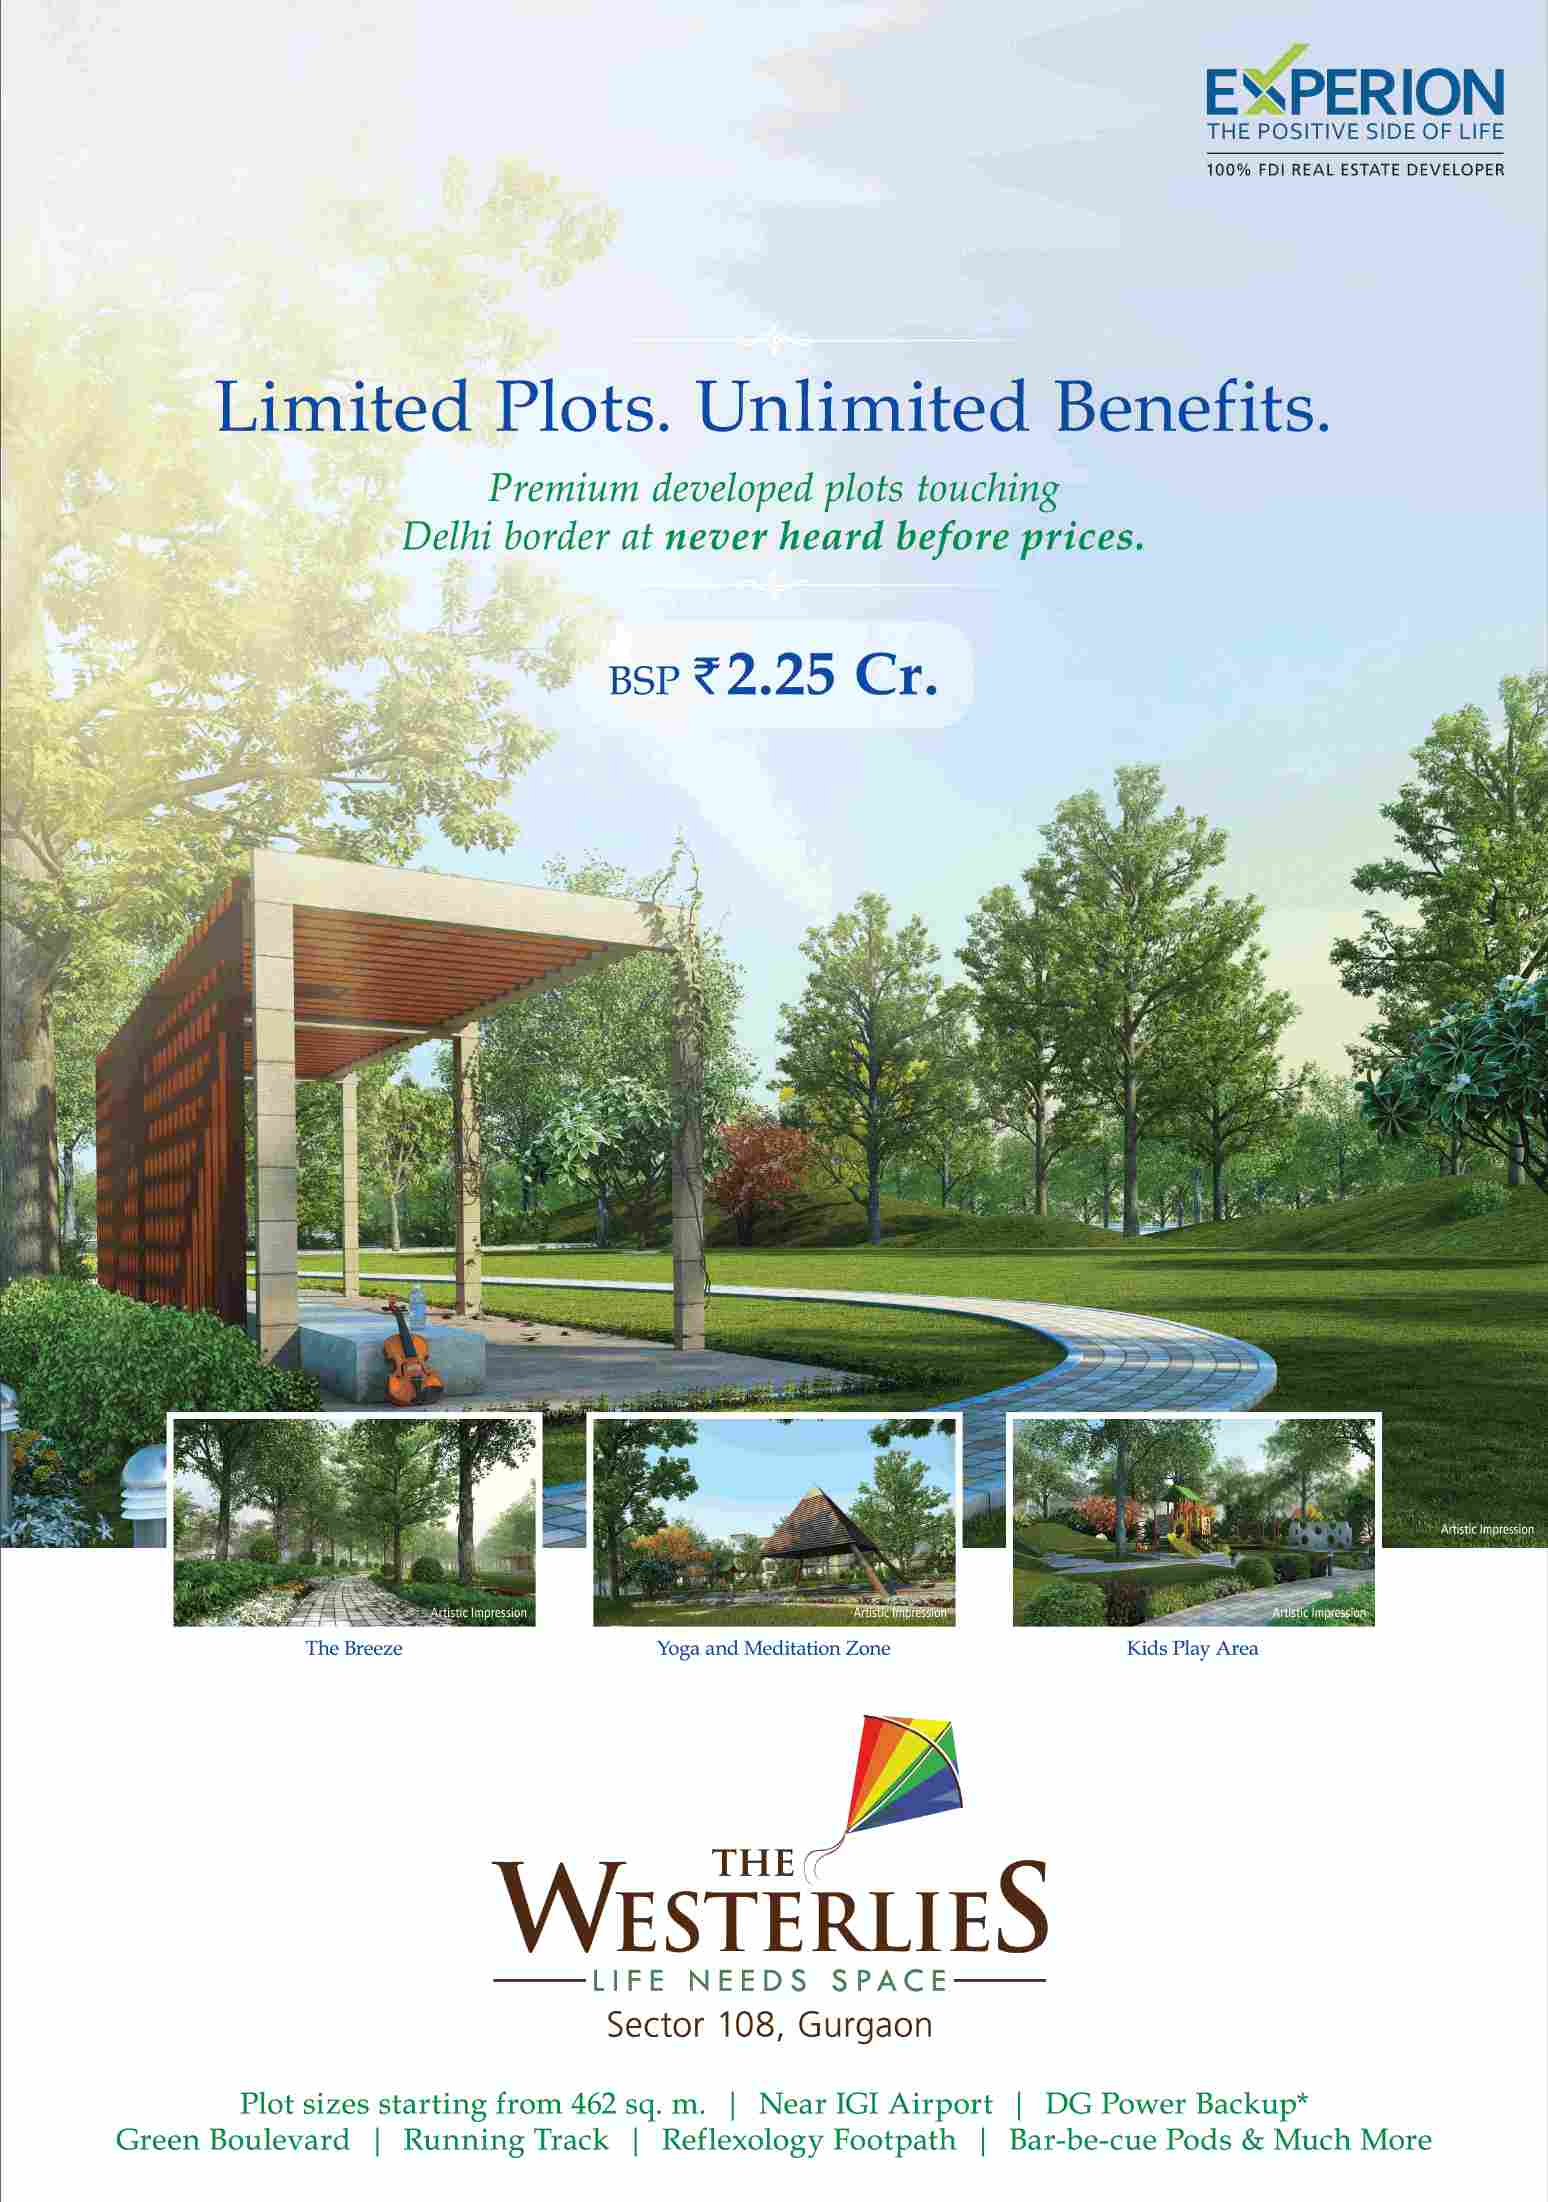 Book premium developed plots @ BSP 2.25 cr. at Experion The Westerlies in Gurgaon Update